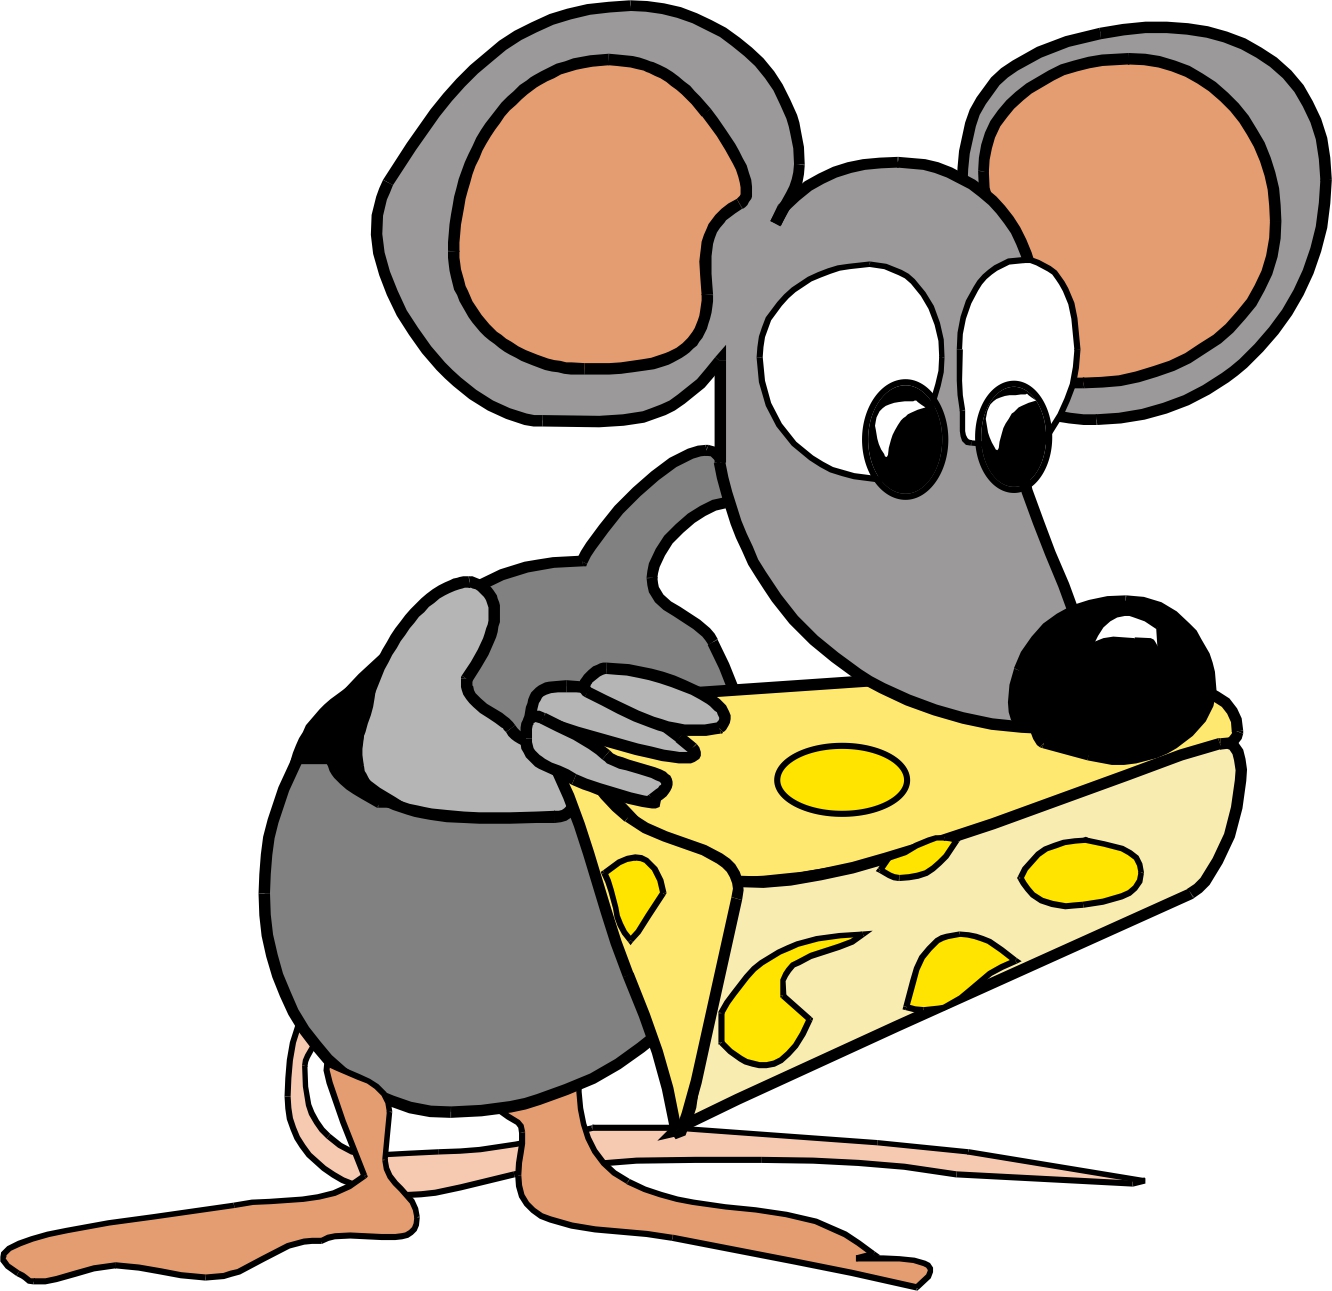 Mouse cheese clipart.